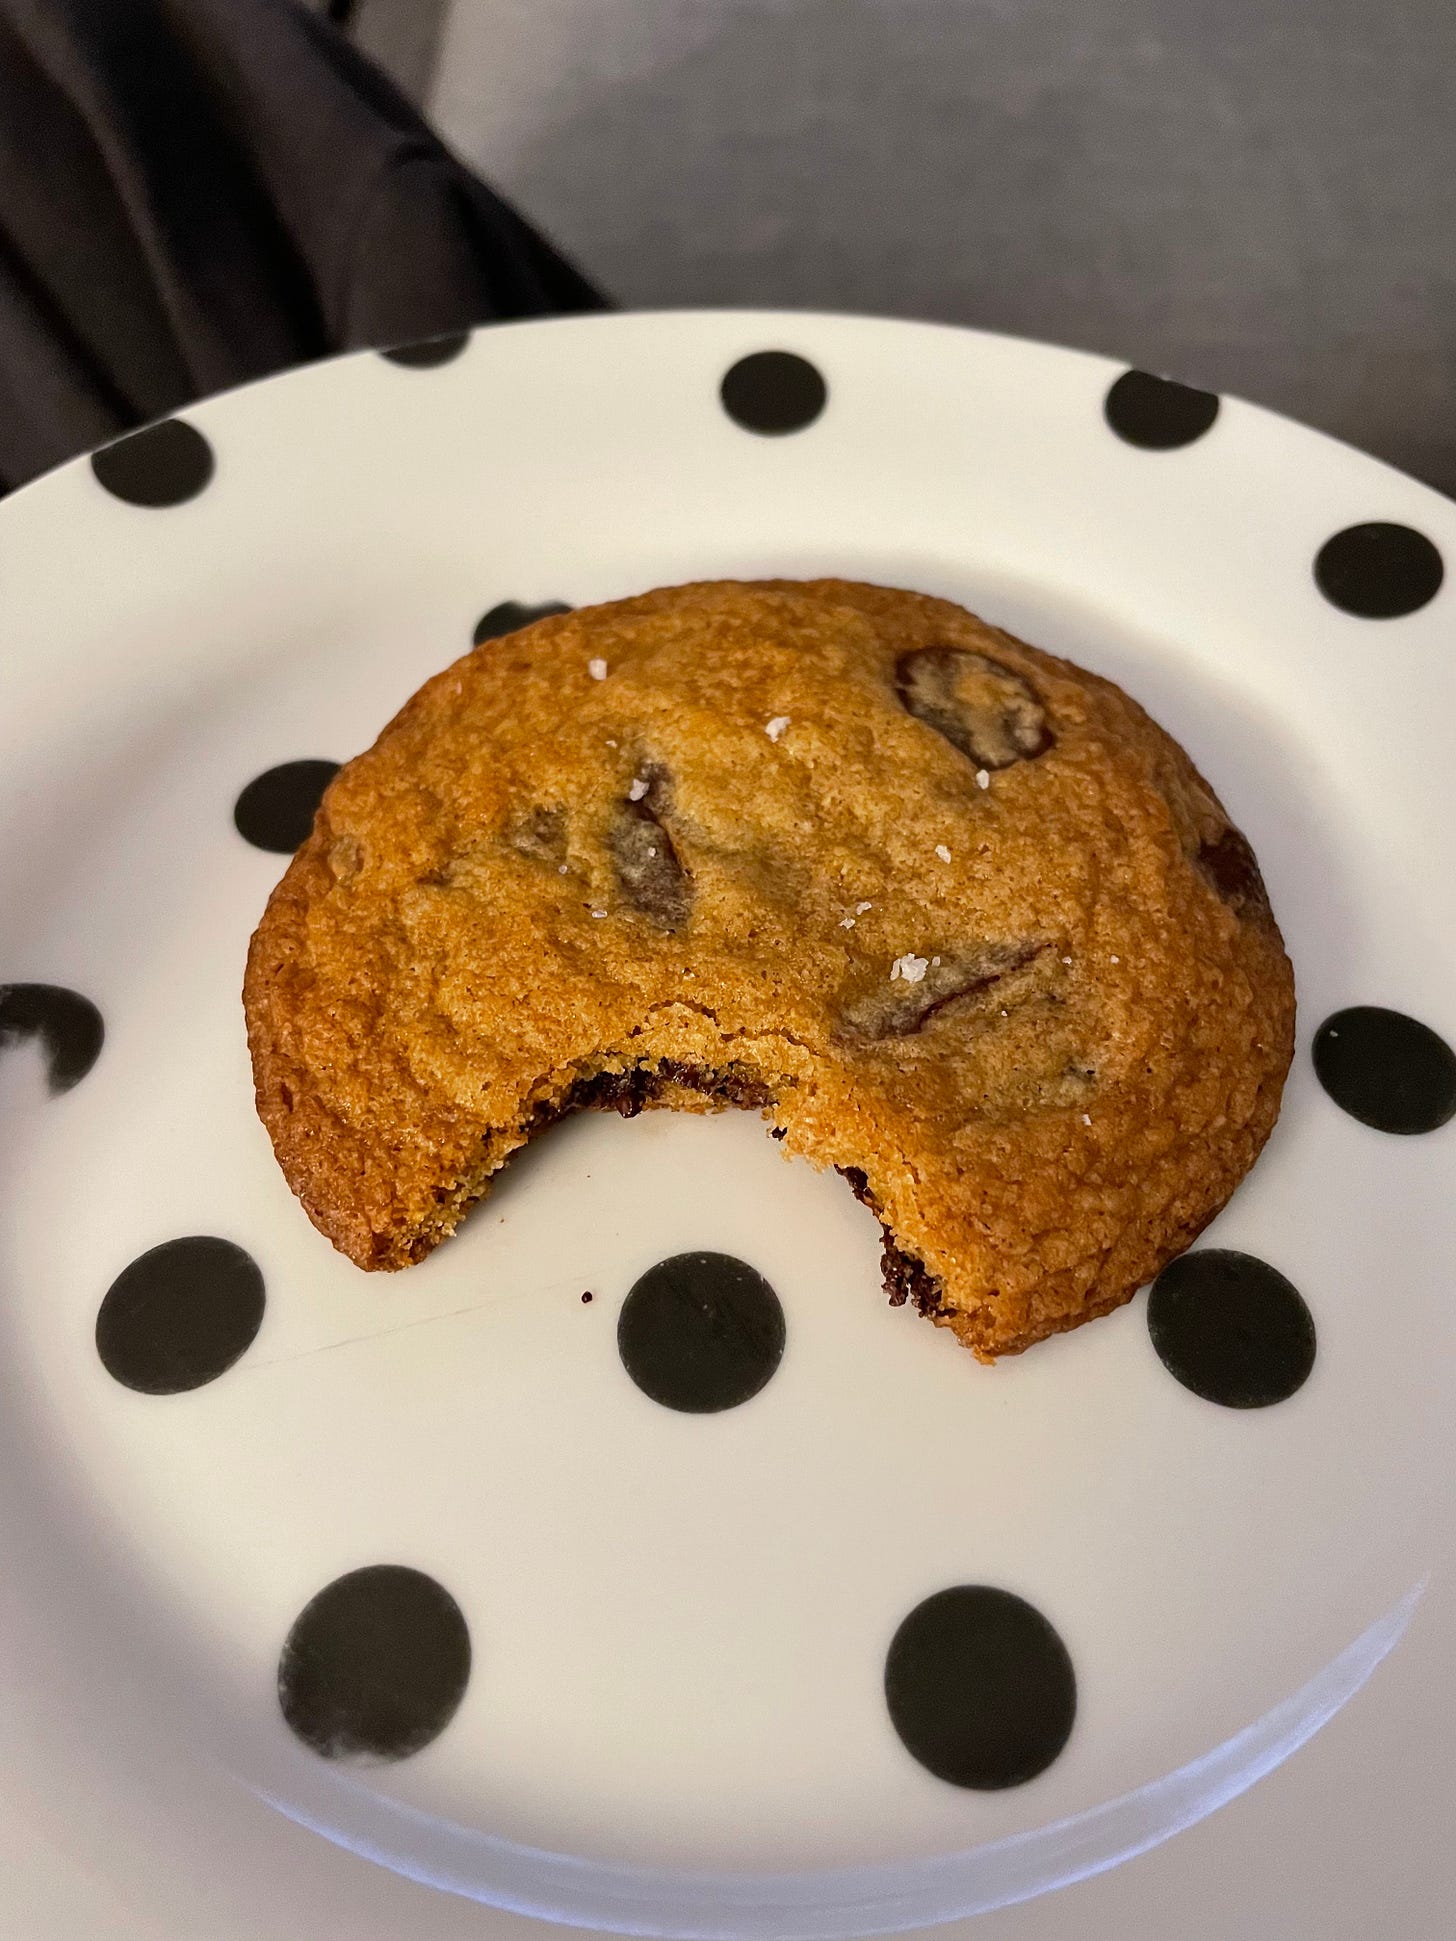 Spotty plate with a browned butter choc chip cookie missing a bite.